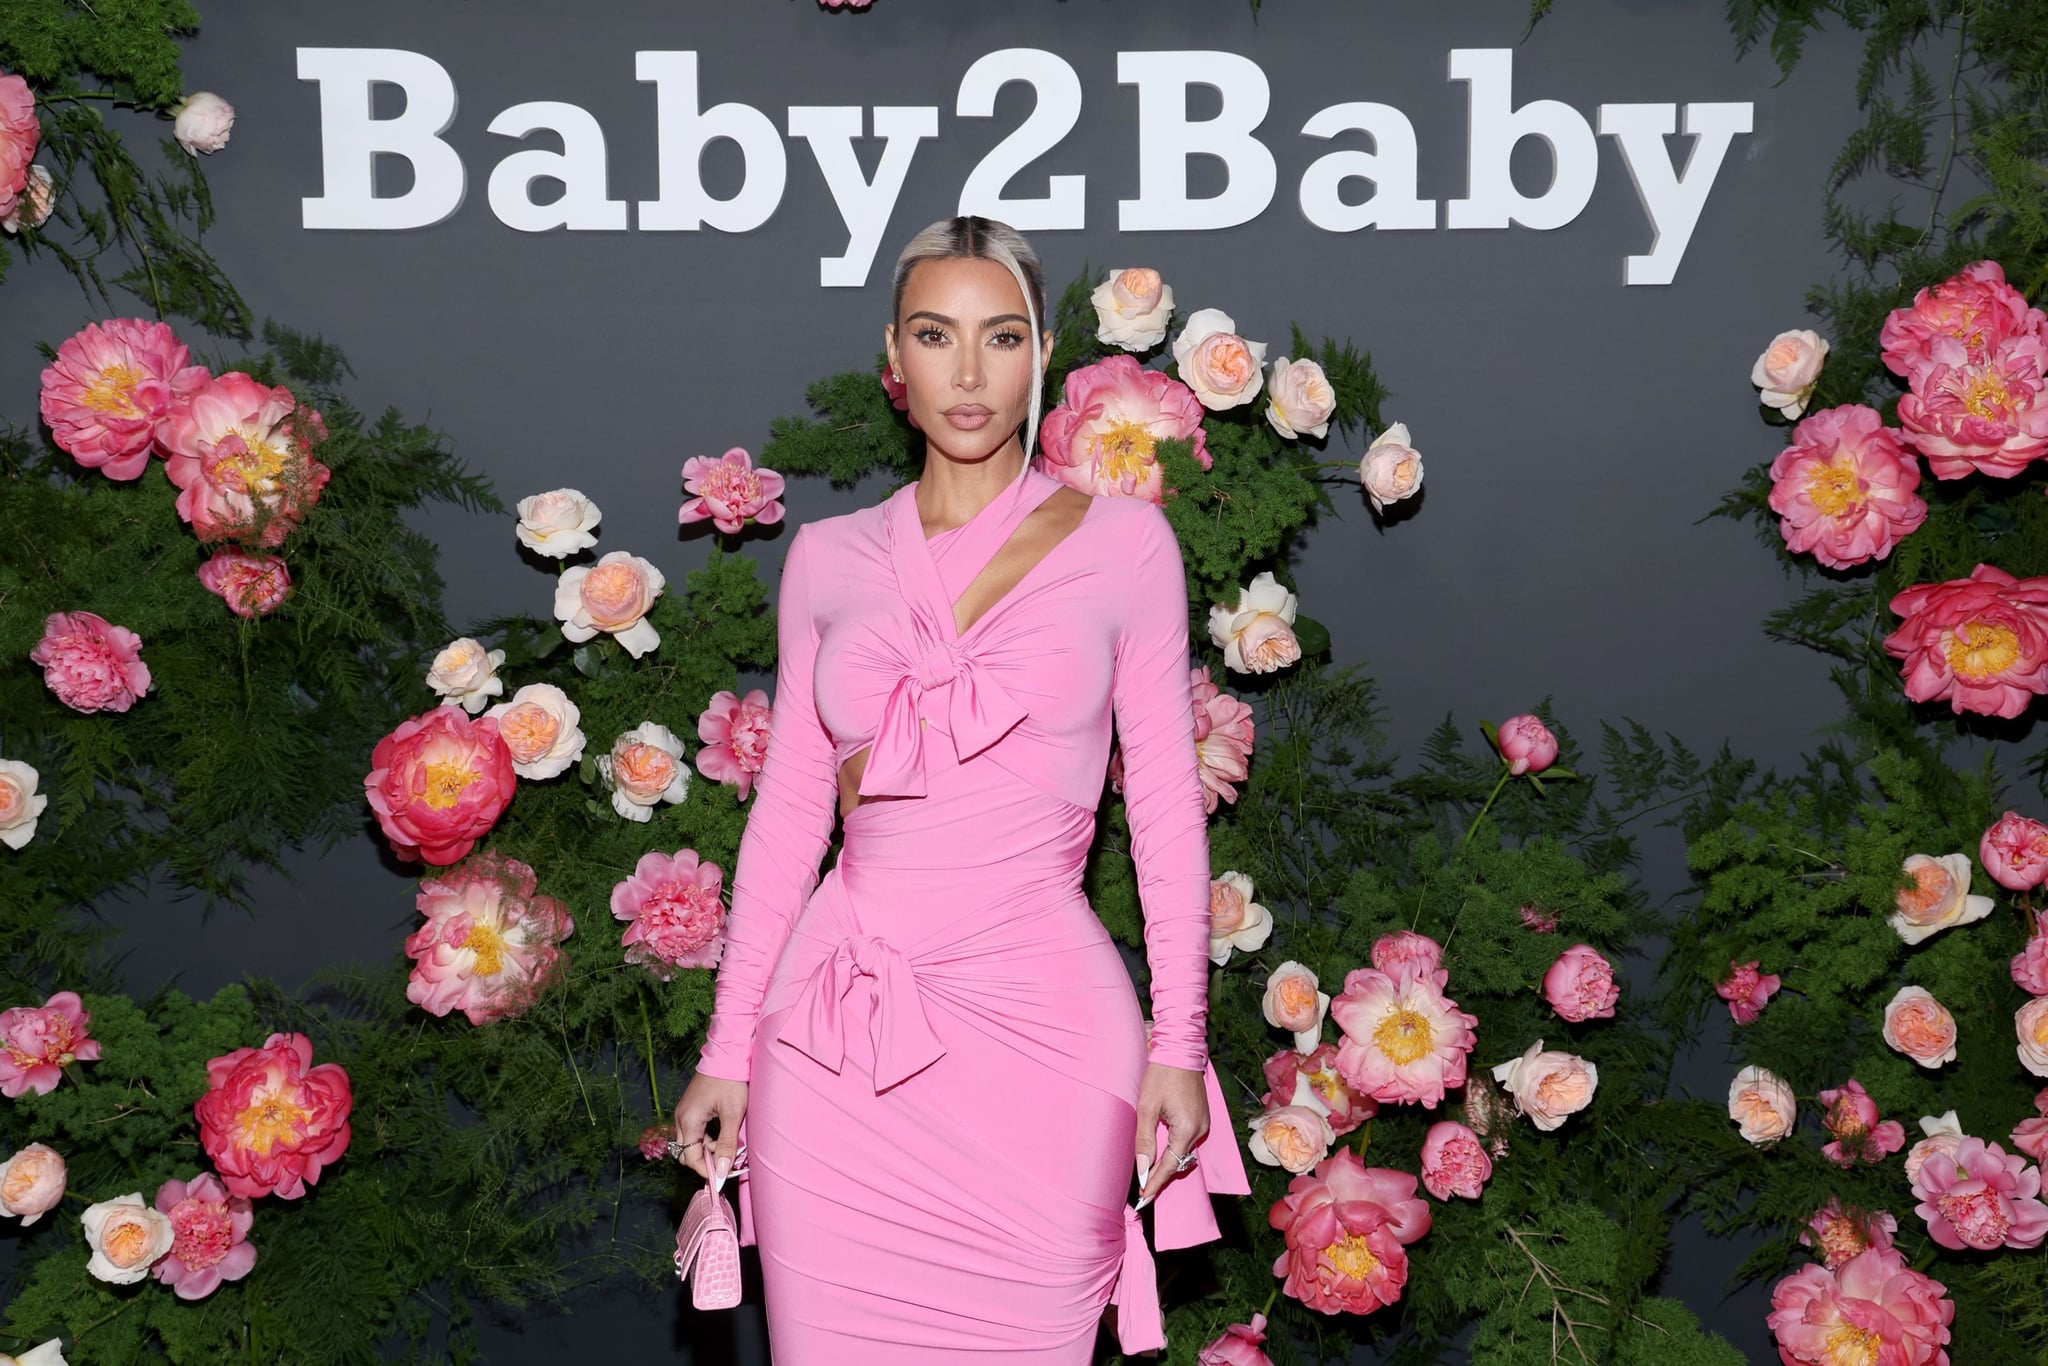 WEST HOLLYWOOD, CALIFORNIA - NOVEMBER 12: Kim Kardashian attends the 2022 Baby2Baby Gala presented by Paul Mitchell at Pacific Design Center on November 12, 2022 in West Hollywood, California. (Photo by Phillip Faraone/Getty Images for Baby2Baby)